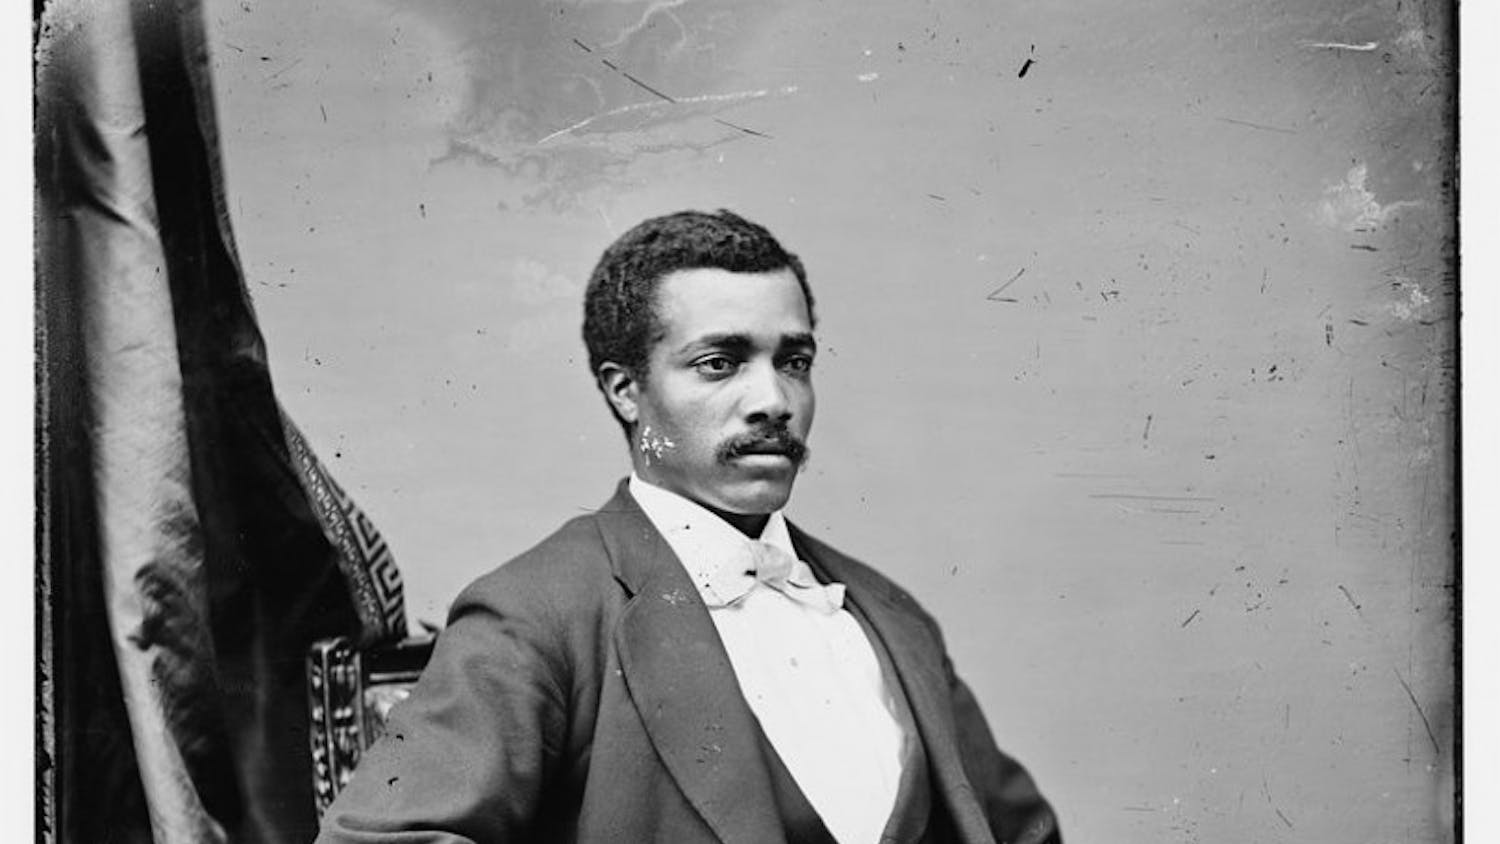 Josiah T. Walls, 1842-1905, was Florida’s first African American representative. He is the only person in Alachua County’s history to serve as the Gainesville mayor, a county commissioner, a school board member, a state senator and a U.S. congressman.